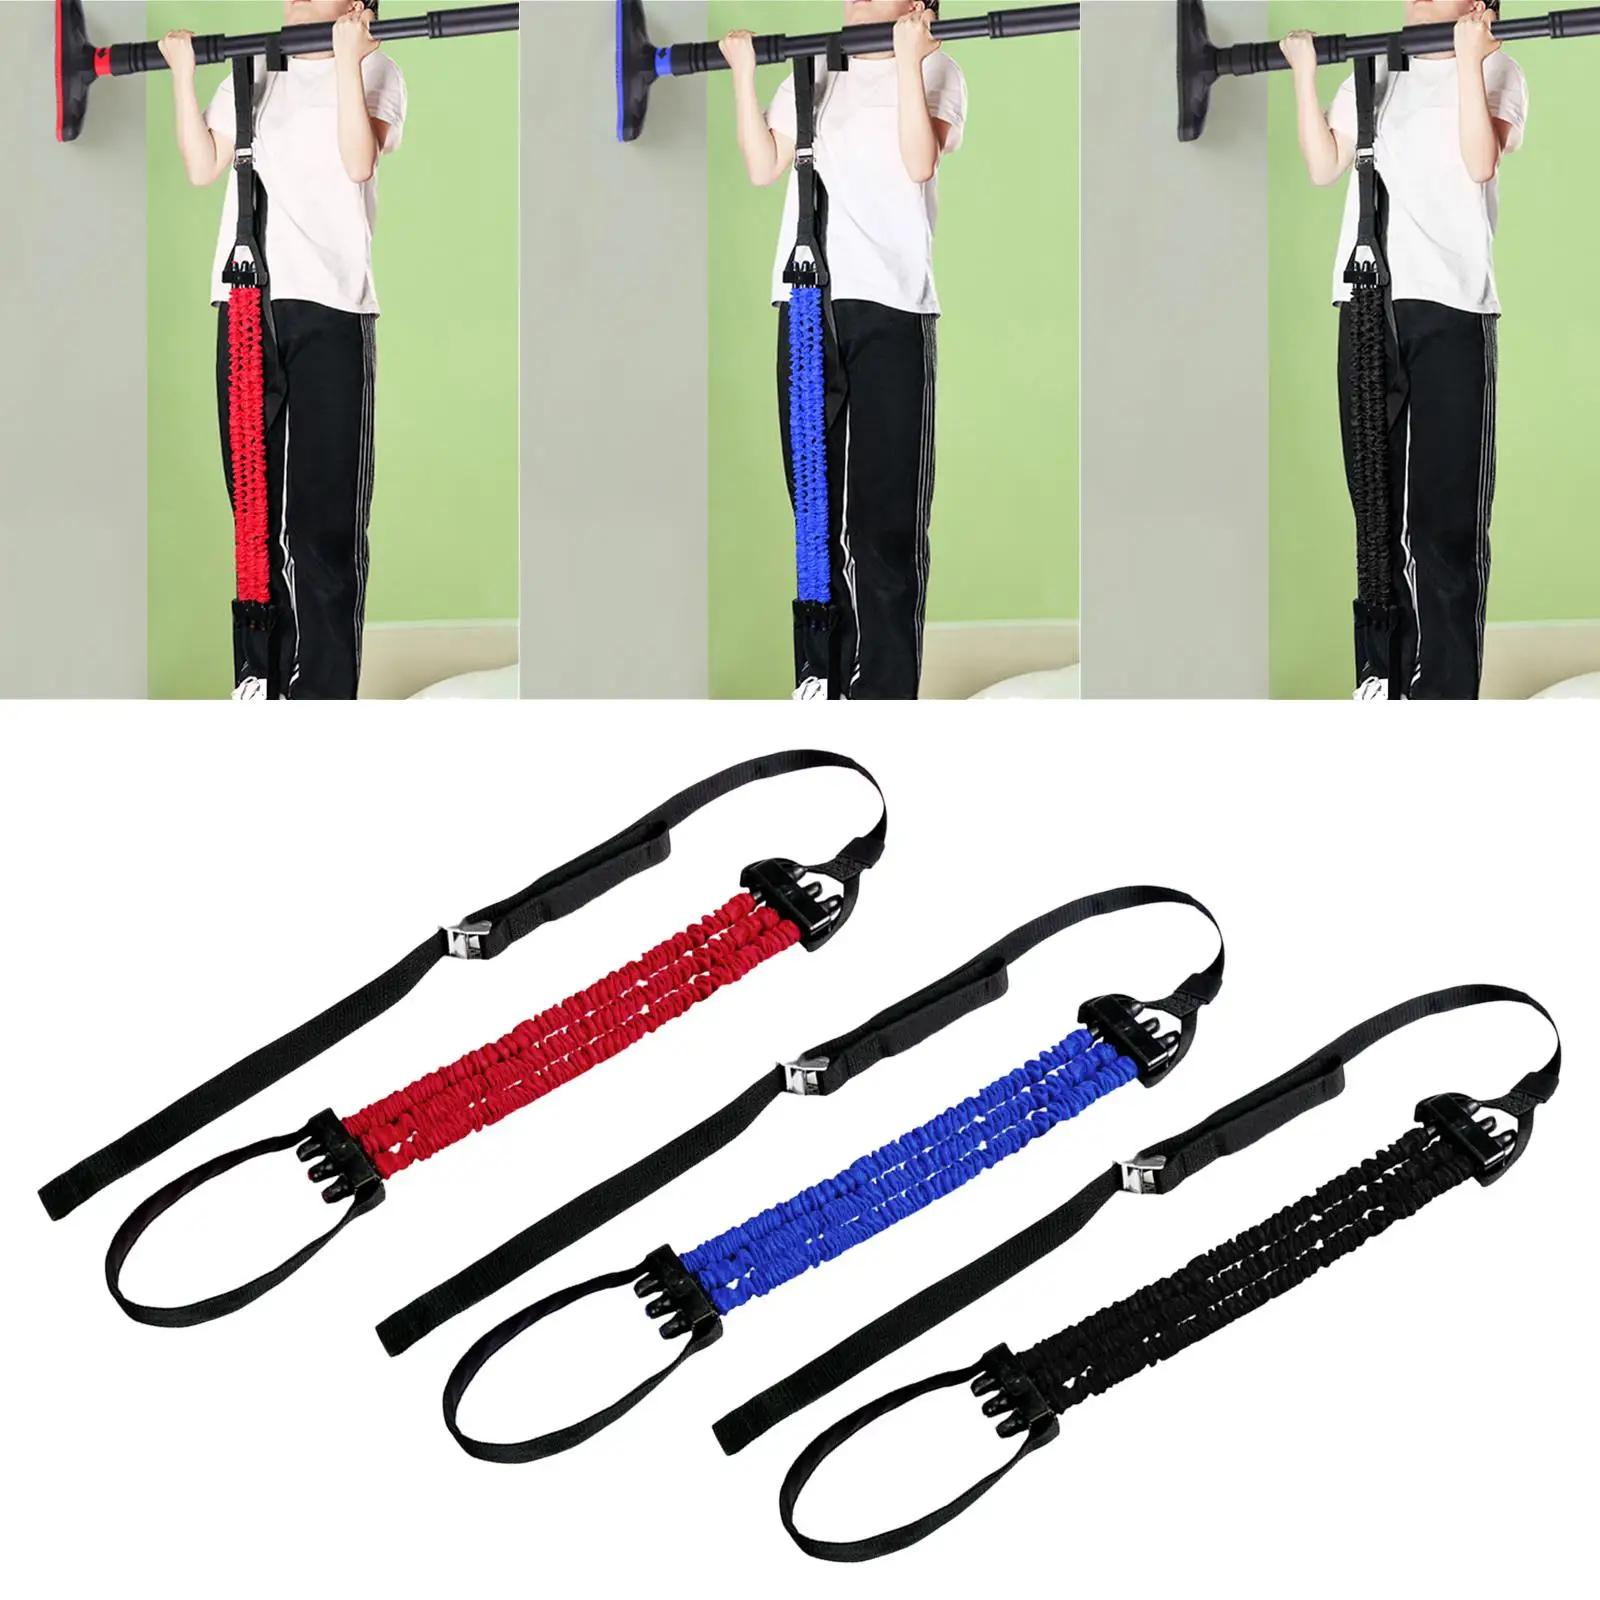 Chin up Assist Band Resistance Bands for Home Gym Strength Training Powerlifting Fitness Workout Equipment